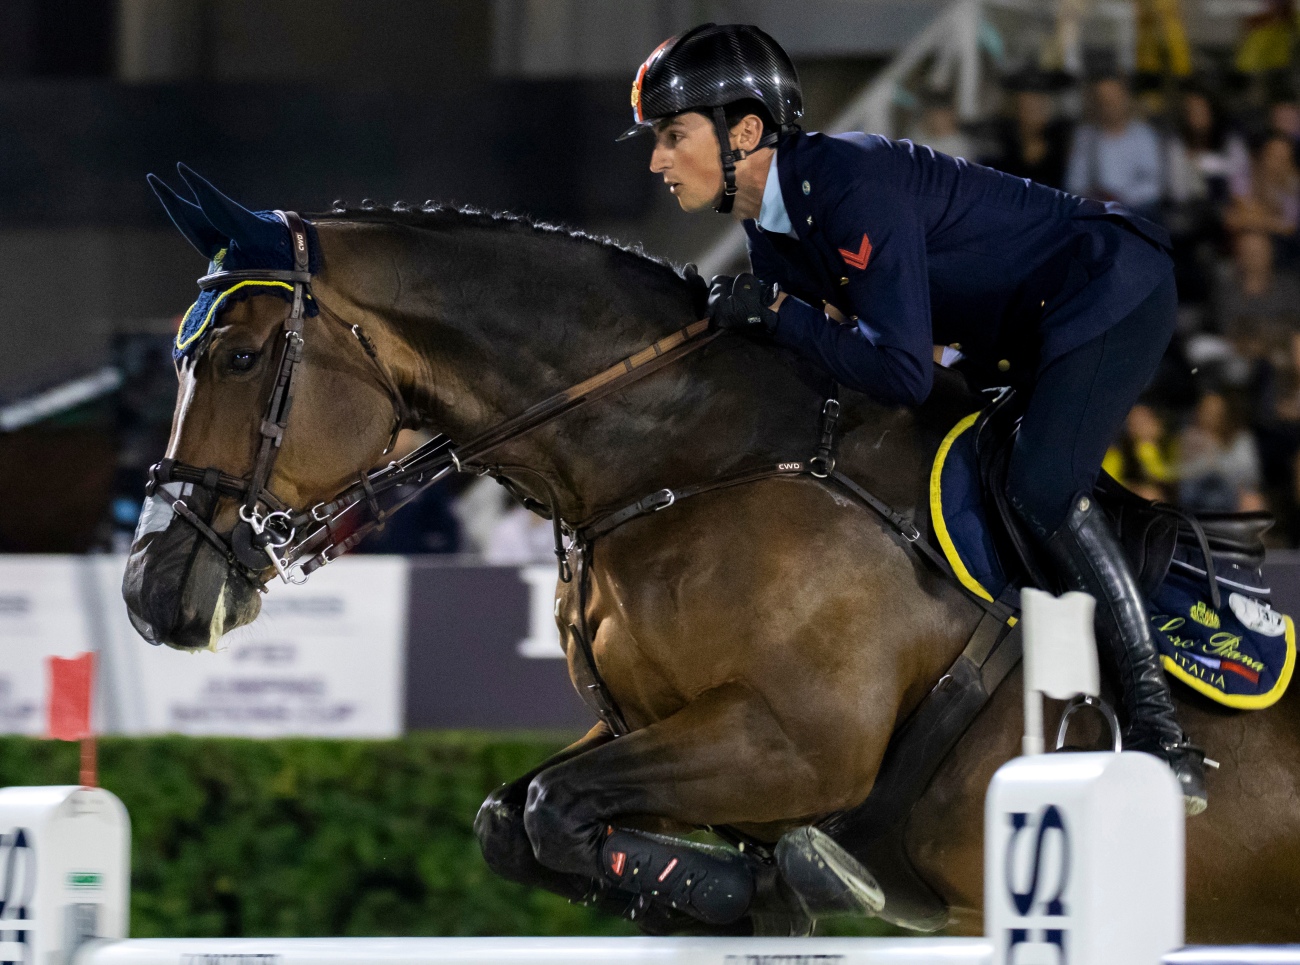 FEI Longines Nations Cup equestrain event in Barcelona